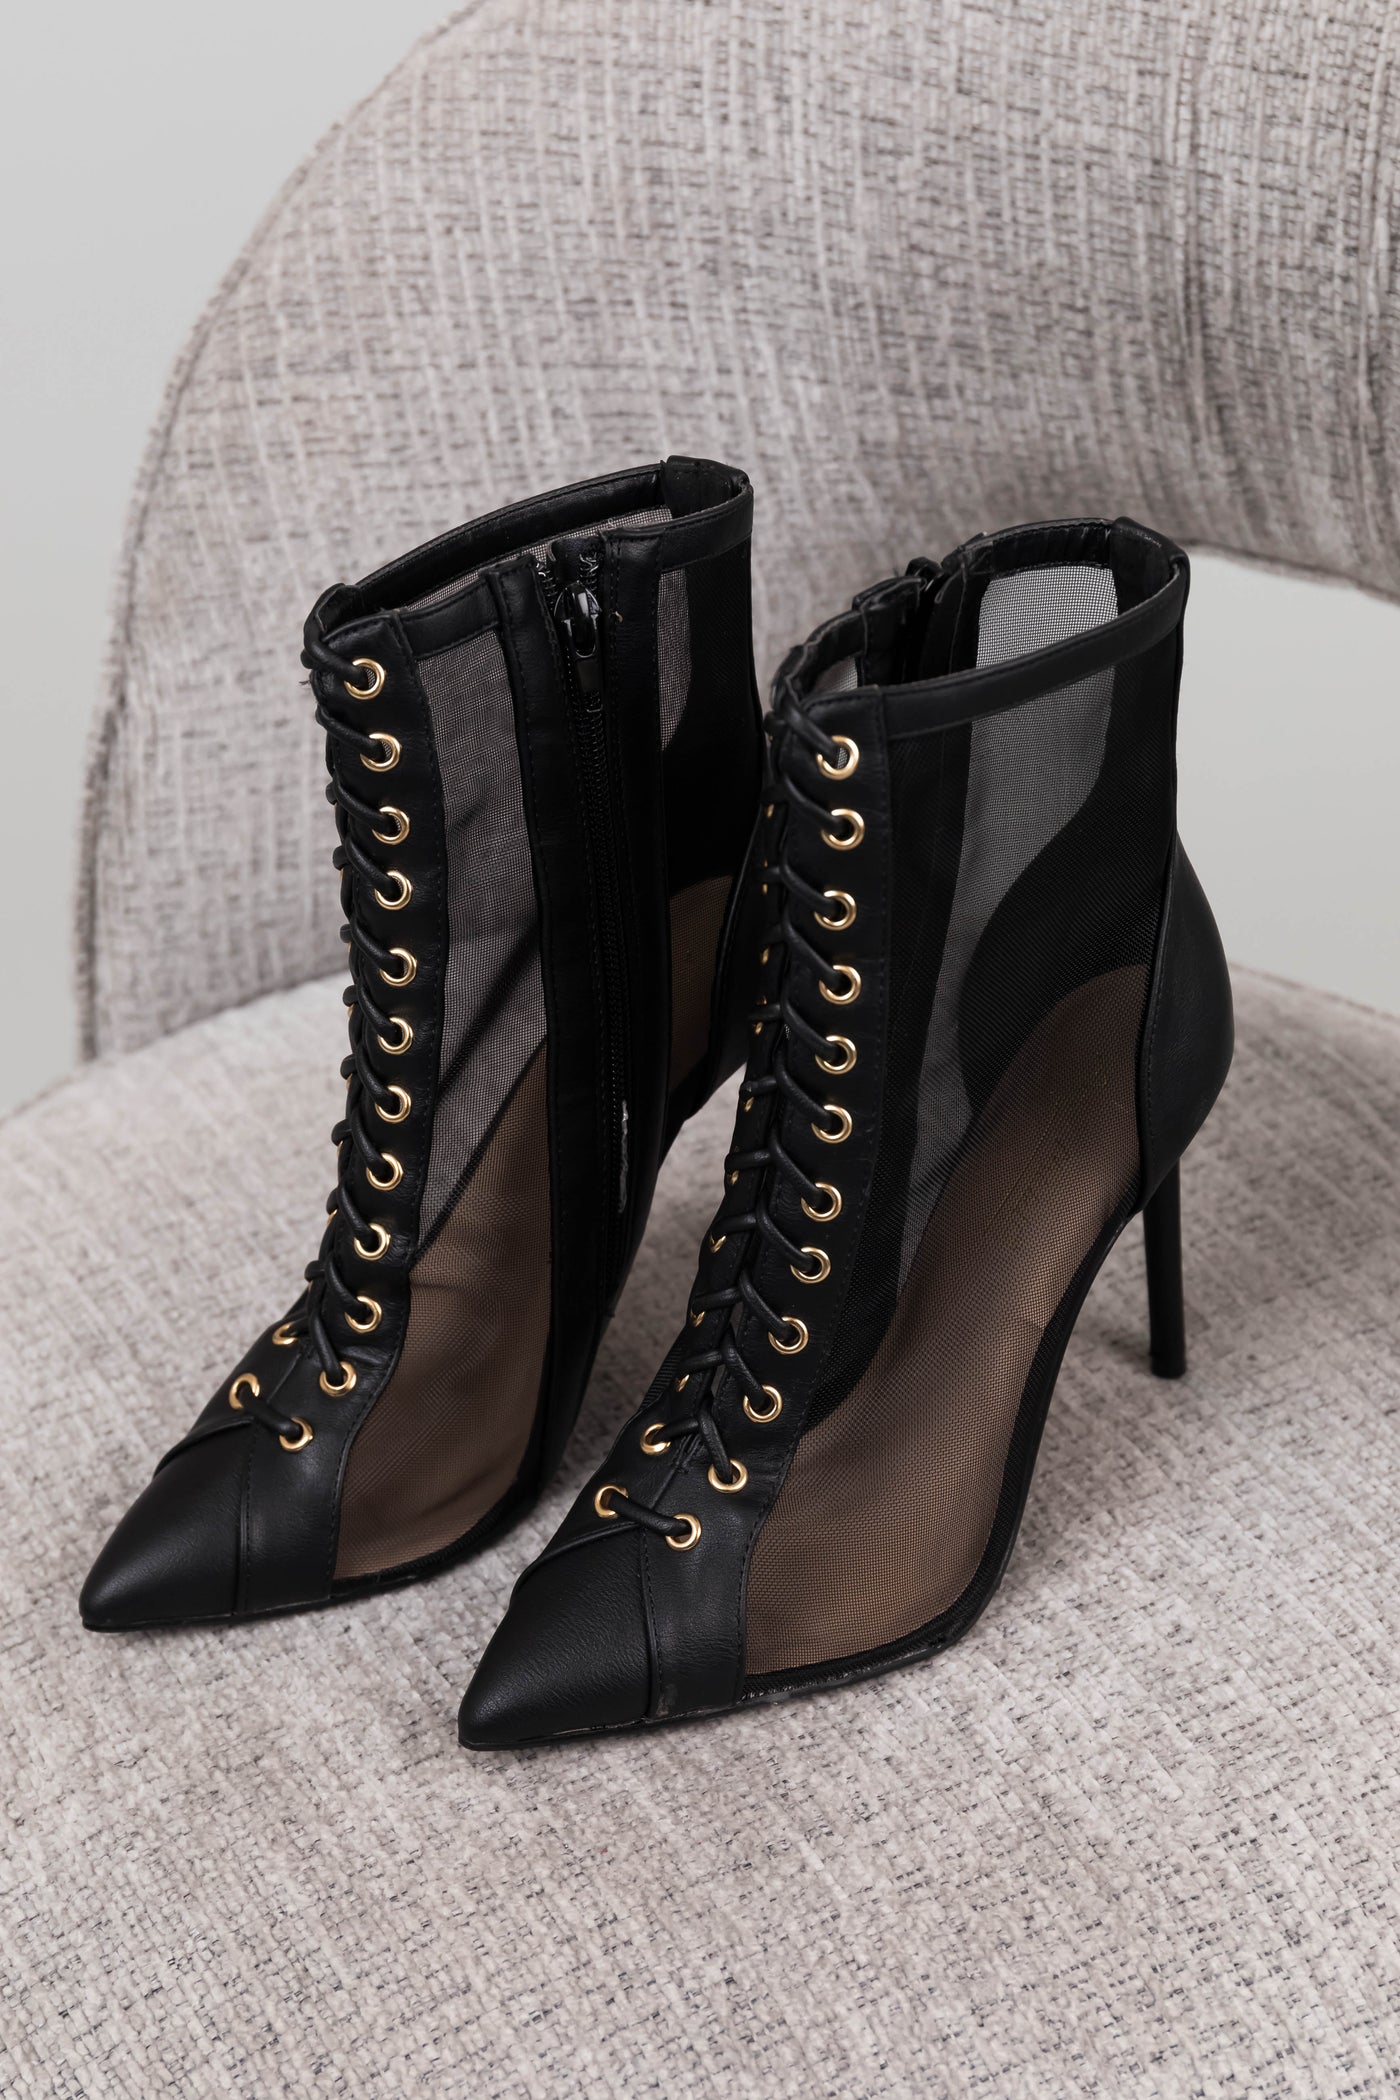 Black Sheer Mesh Lace Up Stiletto Booties